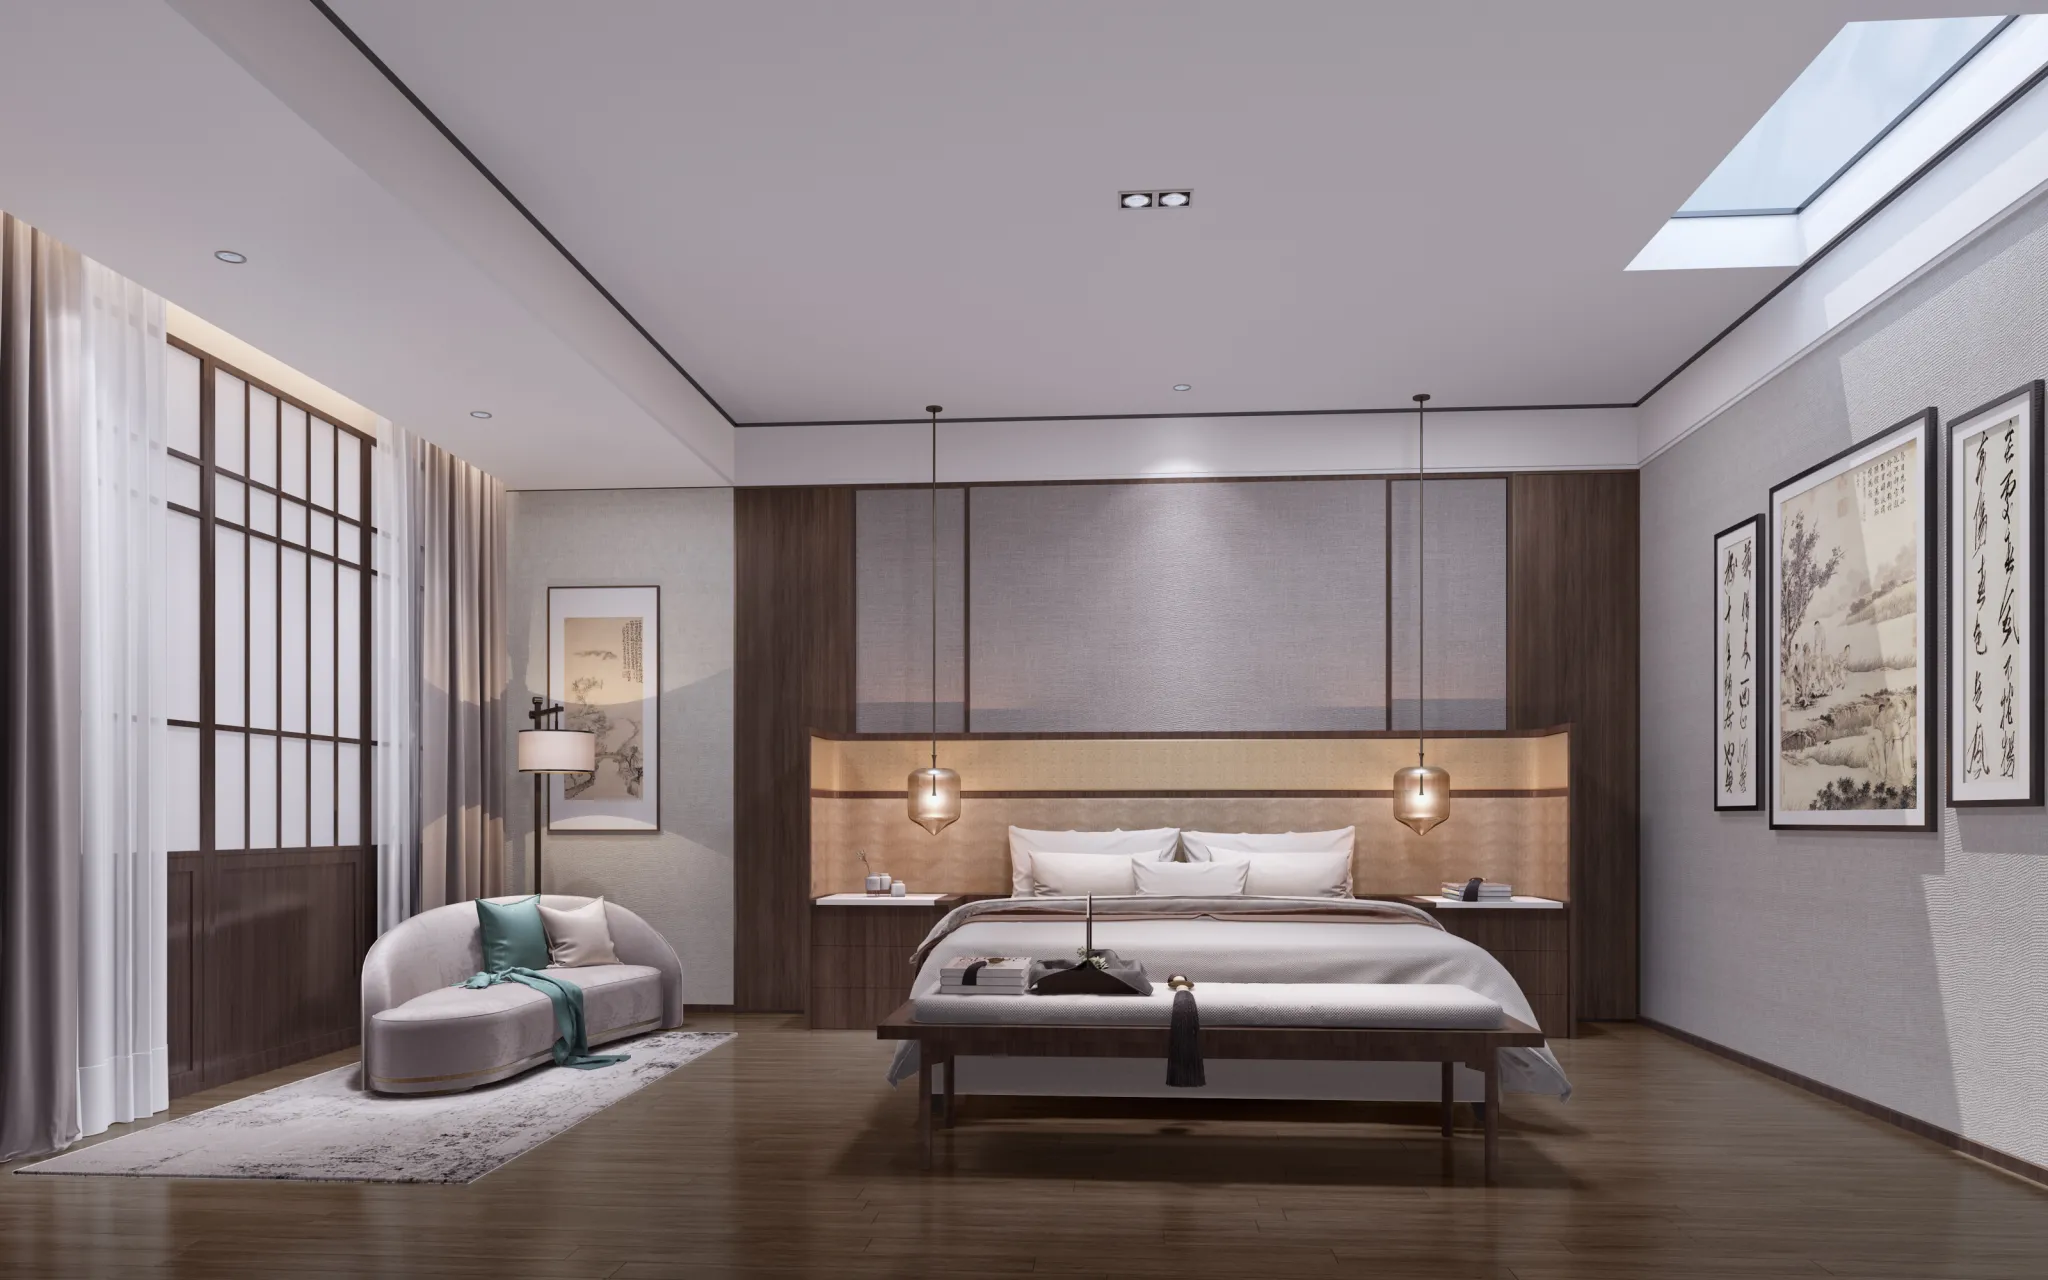 DESMOD INTERIOR 2021 (VRAY)/5. BEDROOM – 2. CHINESE STYLES – 071